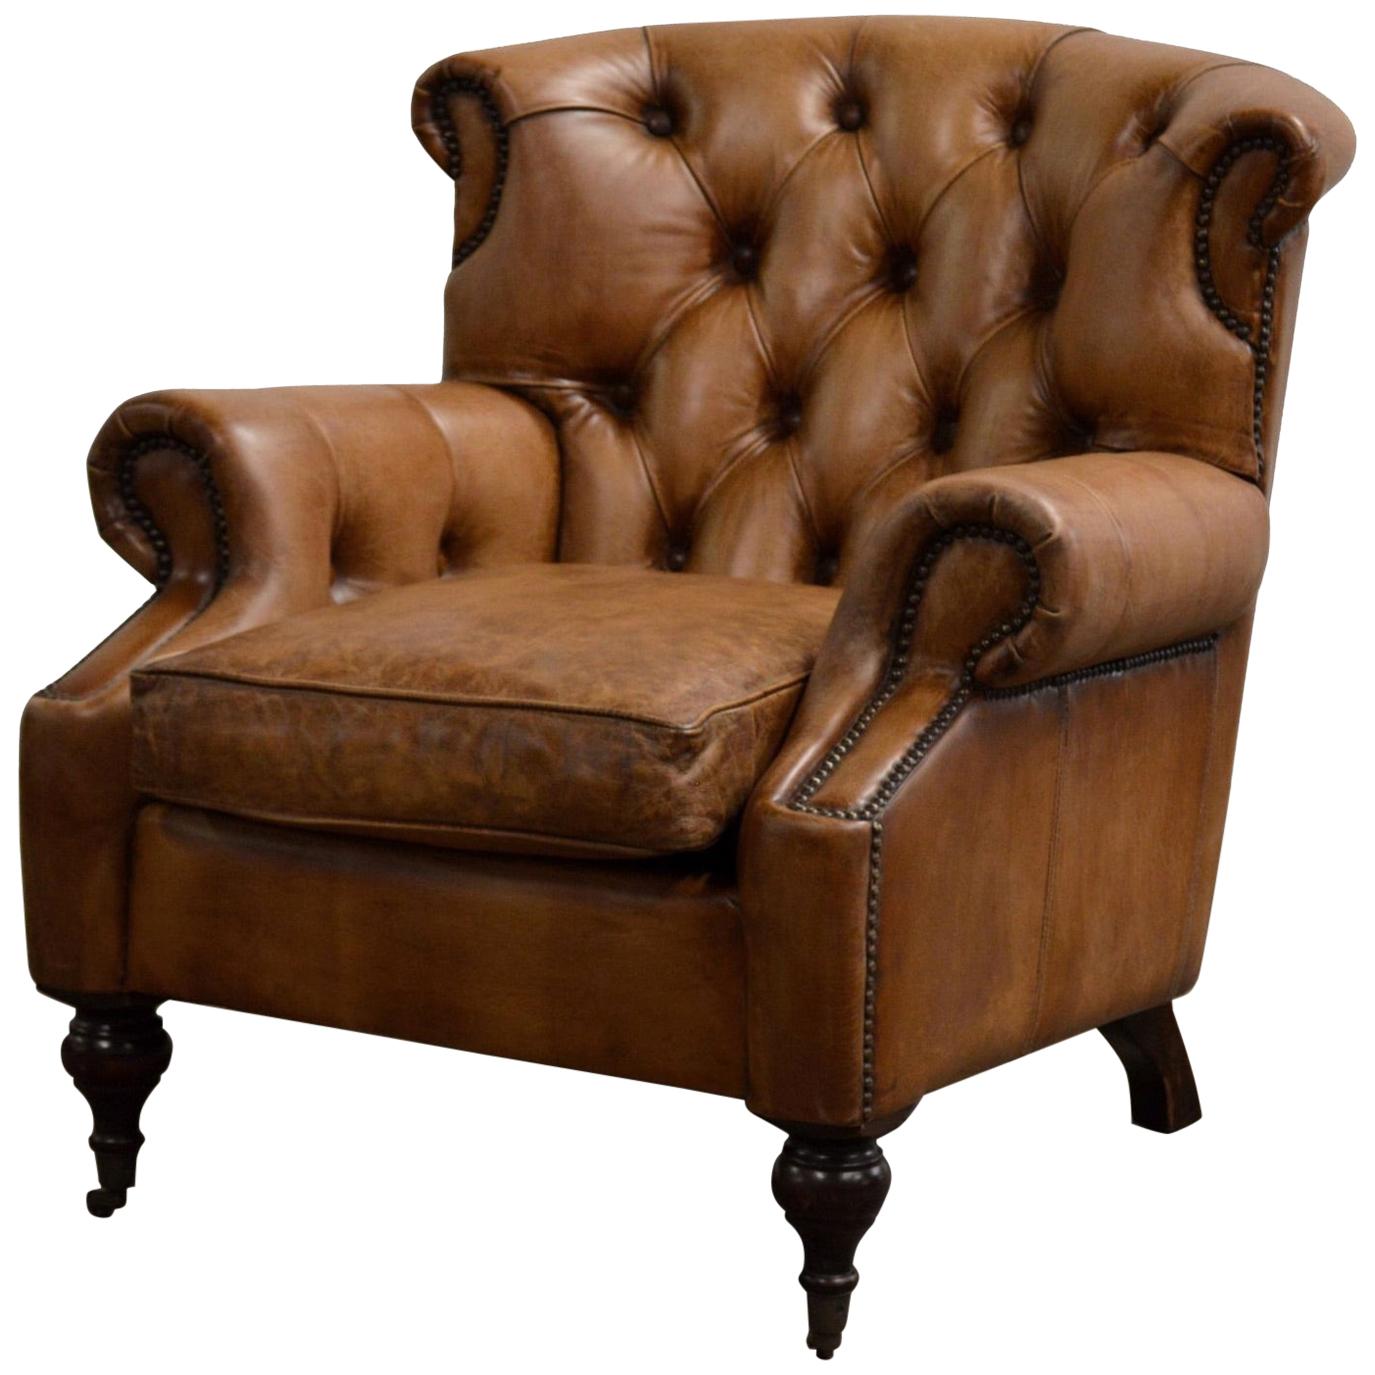 Four English Georgian Style Club Chair with Tufted Back, Lovely Hand Worn Patina